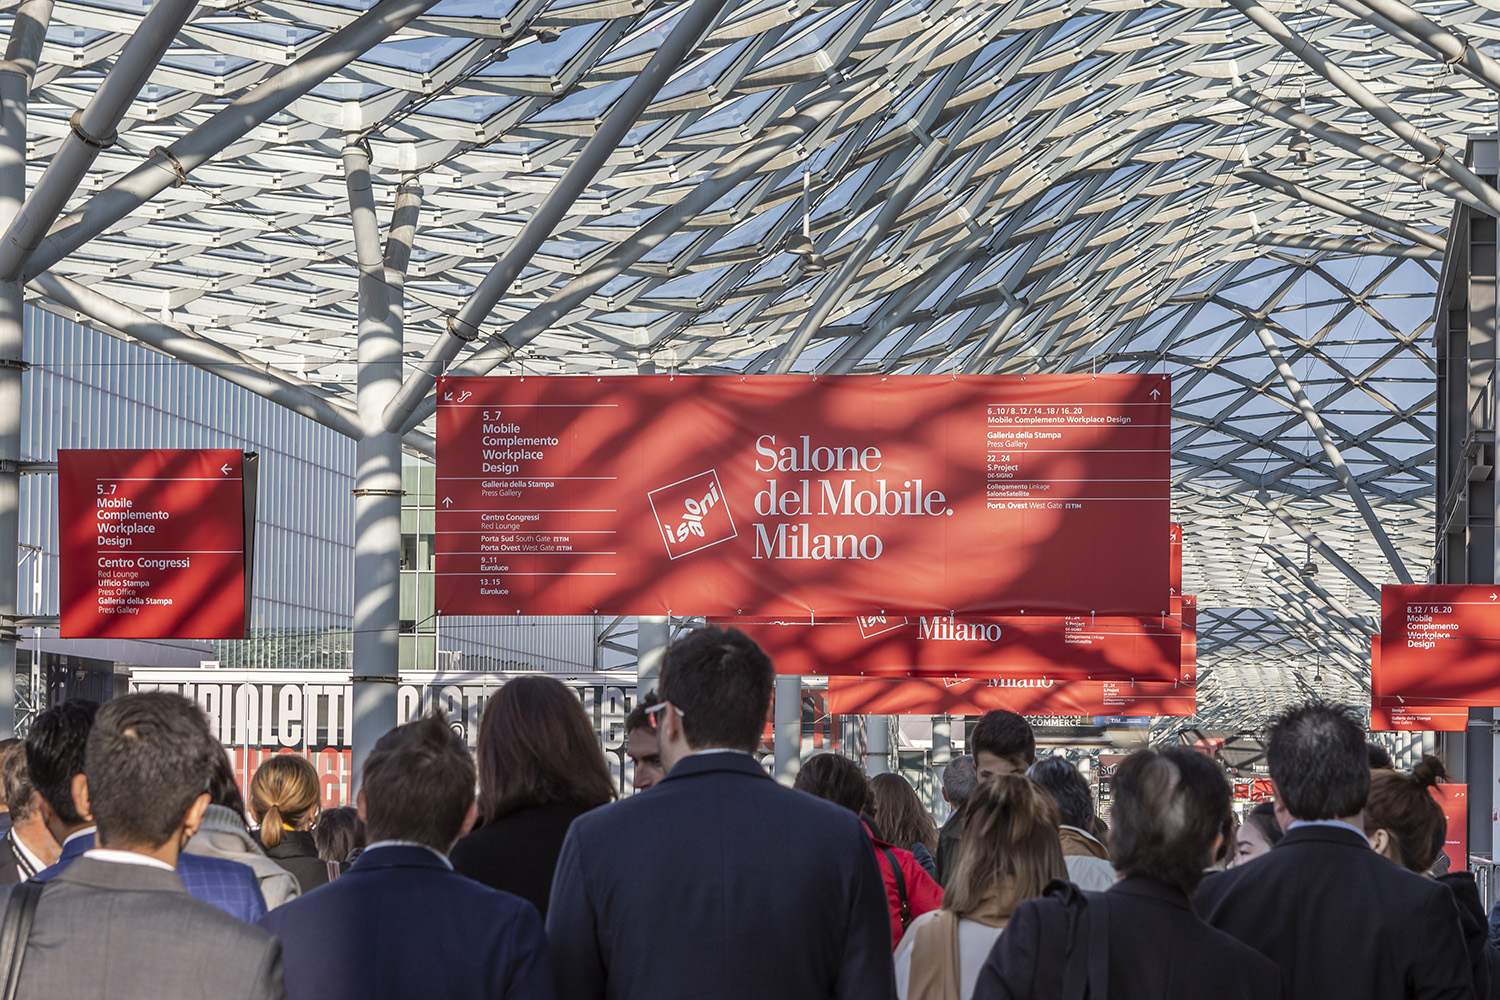 Interior photo of a festival with a red Salone del Mobile banner